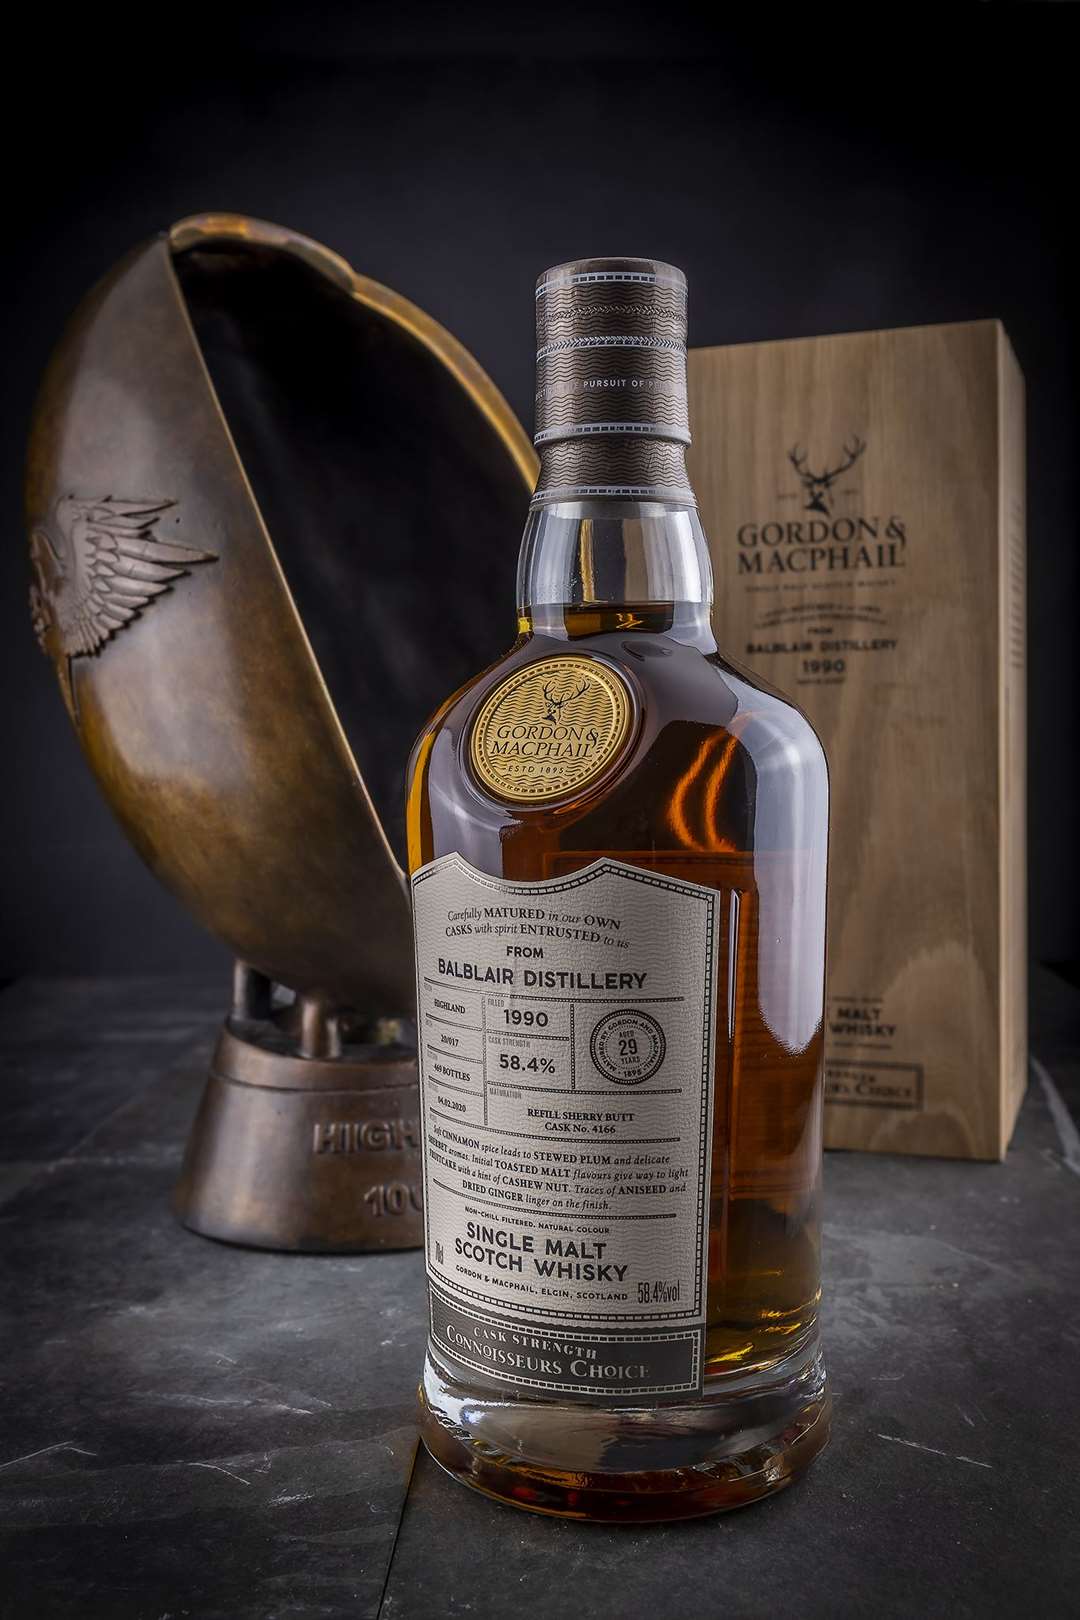 Just 469 bottles of the Balblair Highland single malt whisky were created from a single sherry butt filled in 1990.